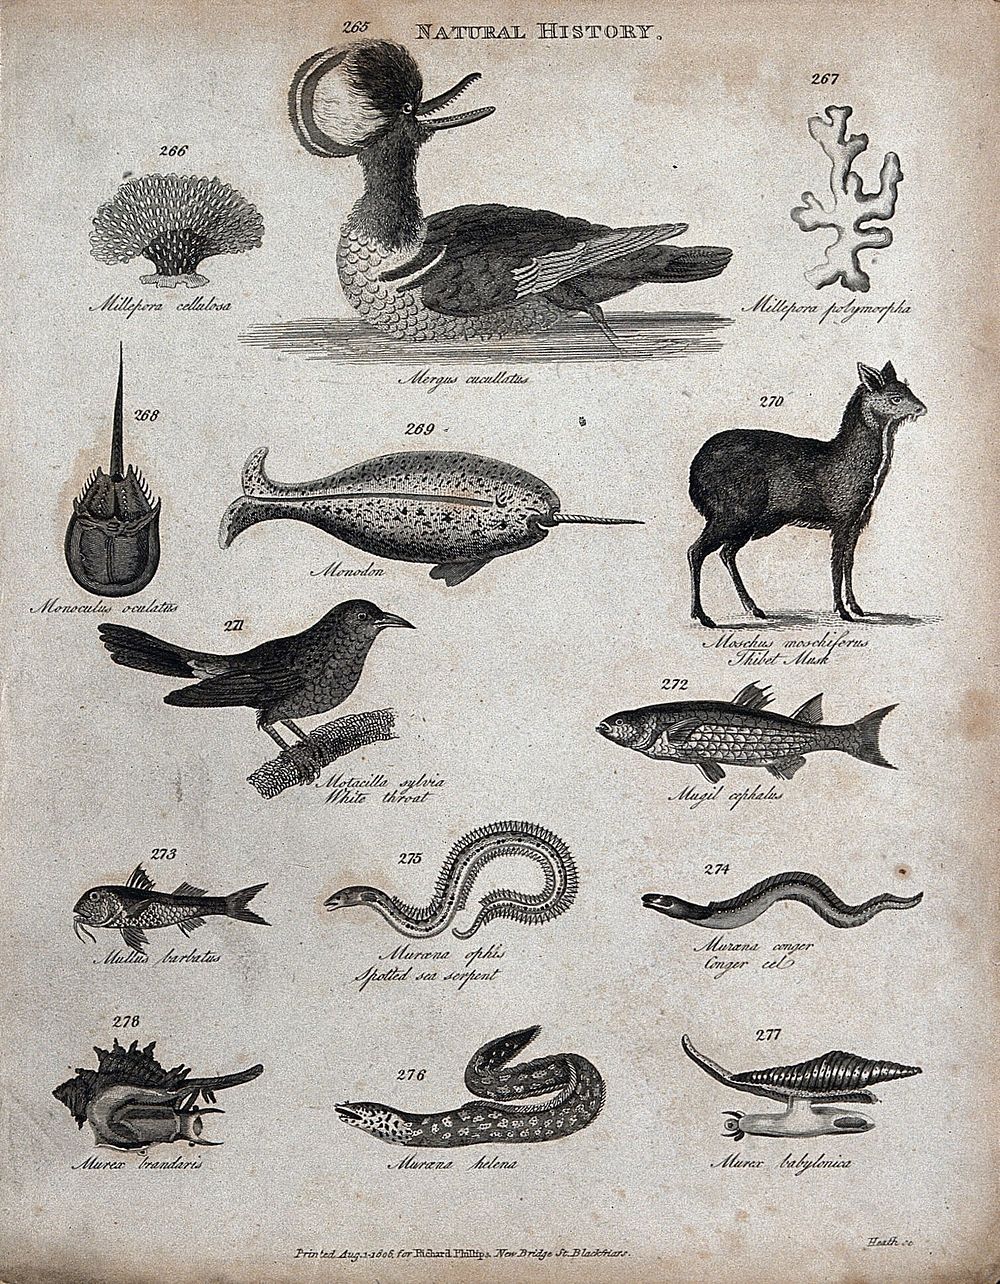 Above, two reef building corals (millepora), a diving bird, a narwhal (monodon), a mollusc and a musk deer; below, a small…